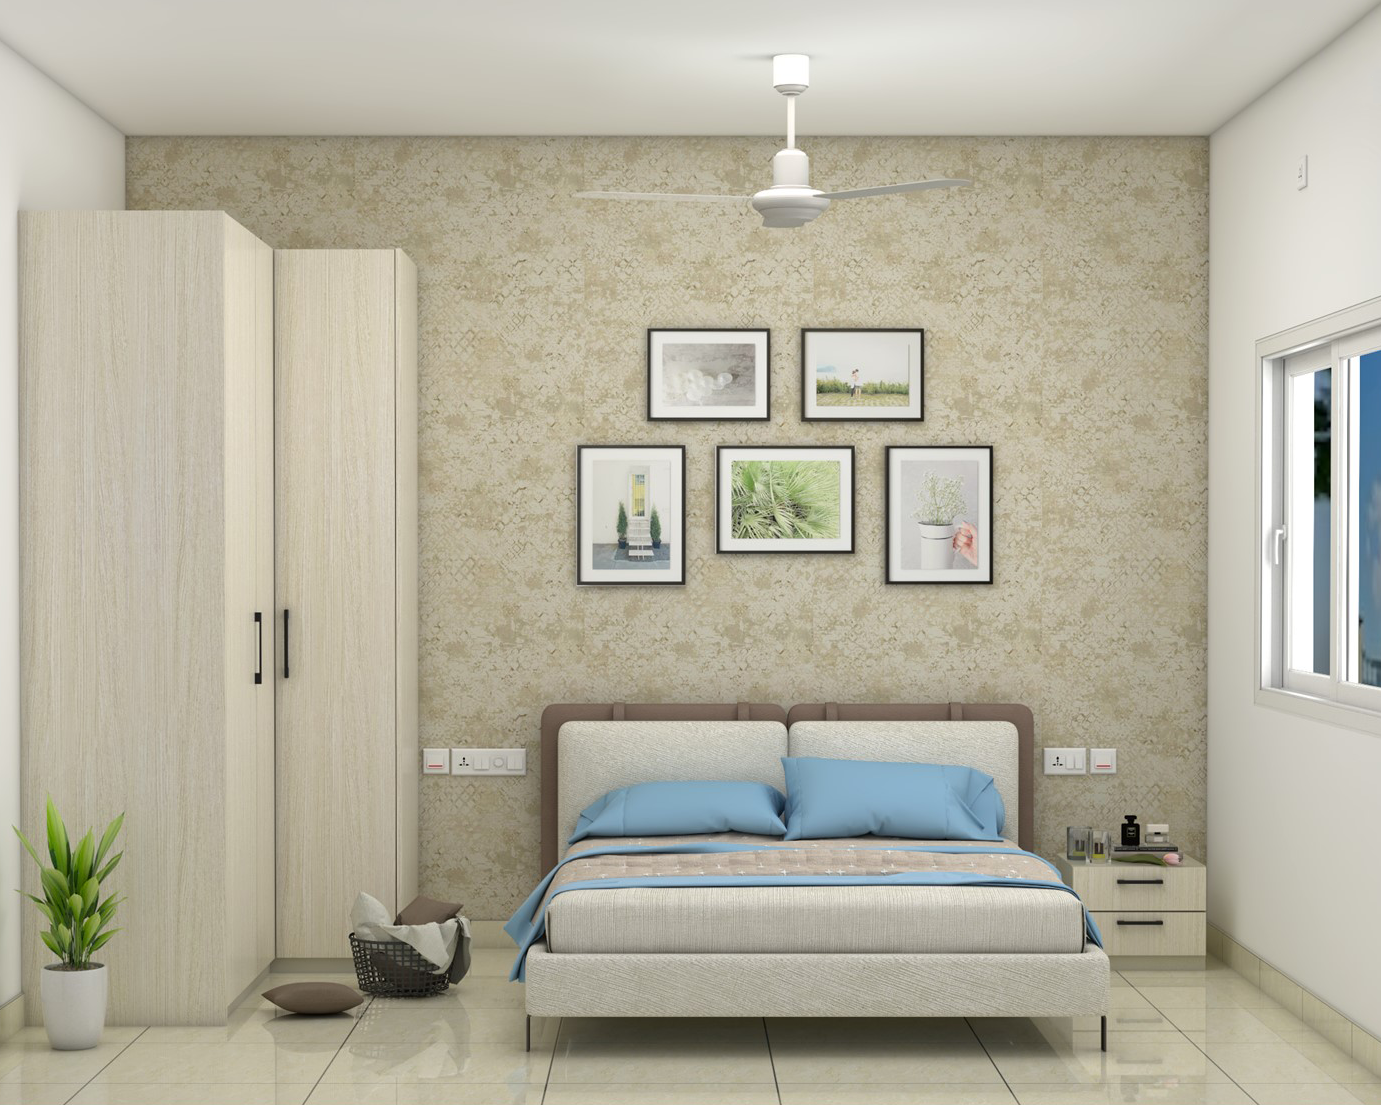 Modern Kid's Bedroom Design With L-Shaped Cupboard